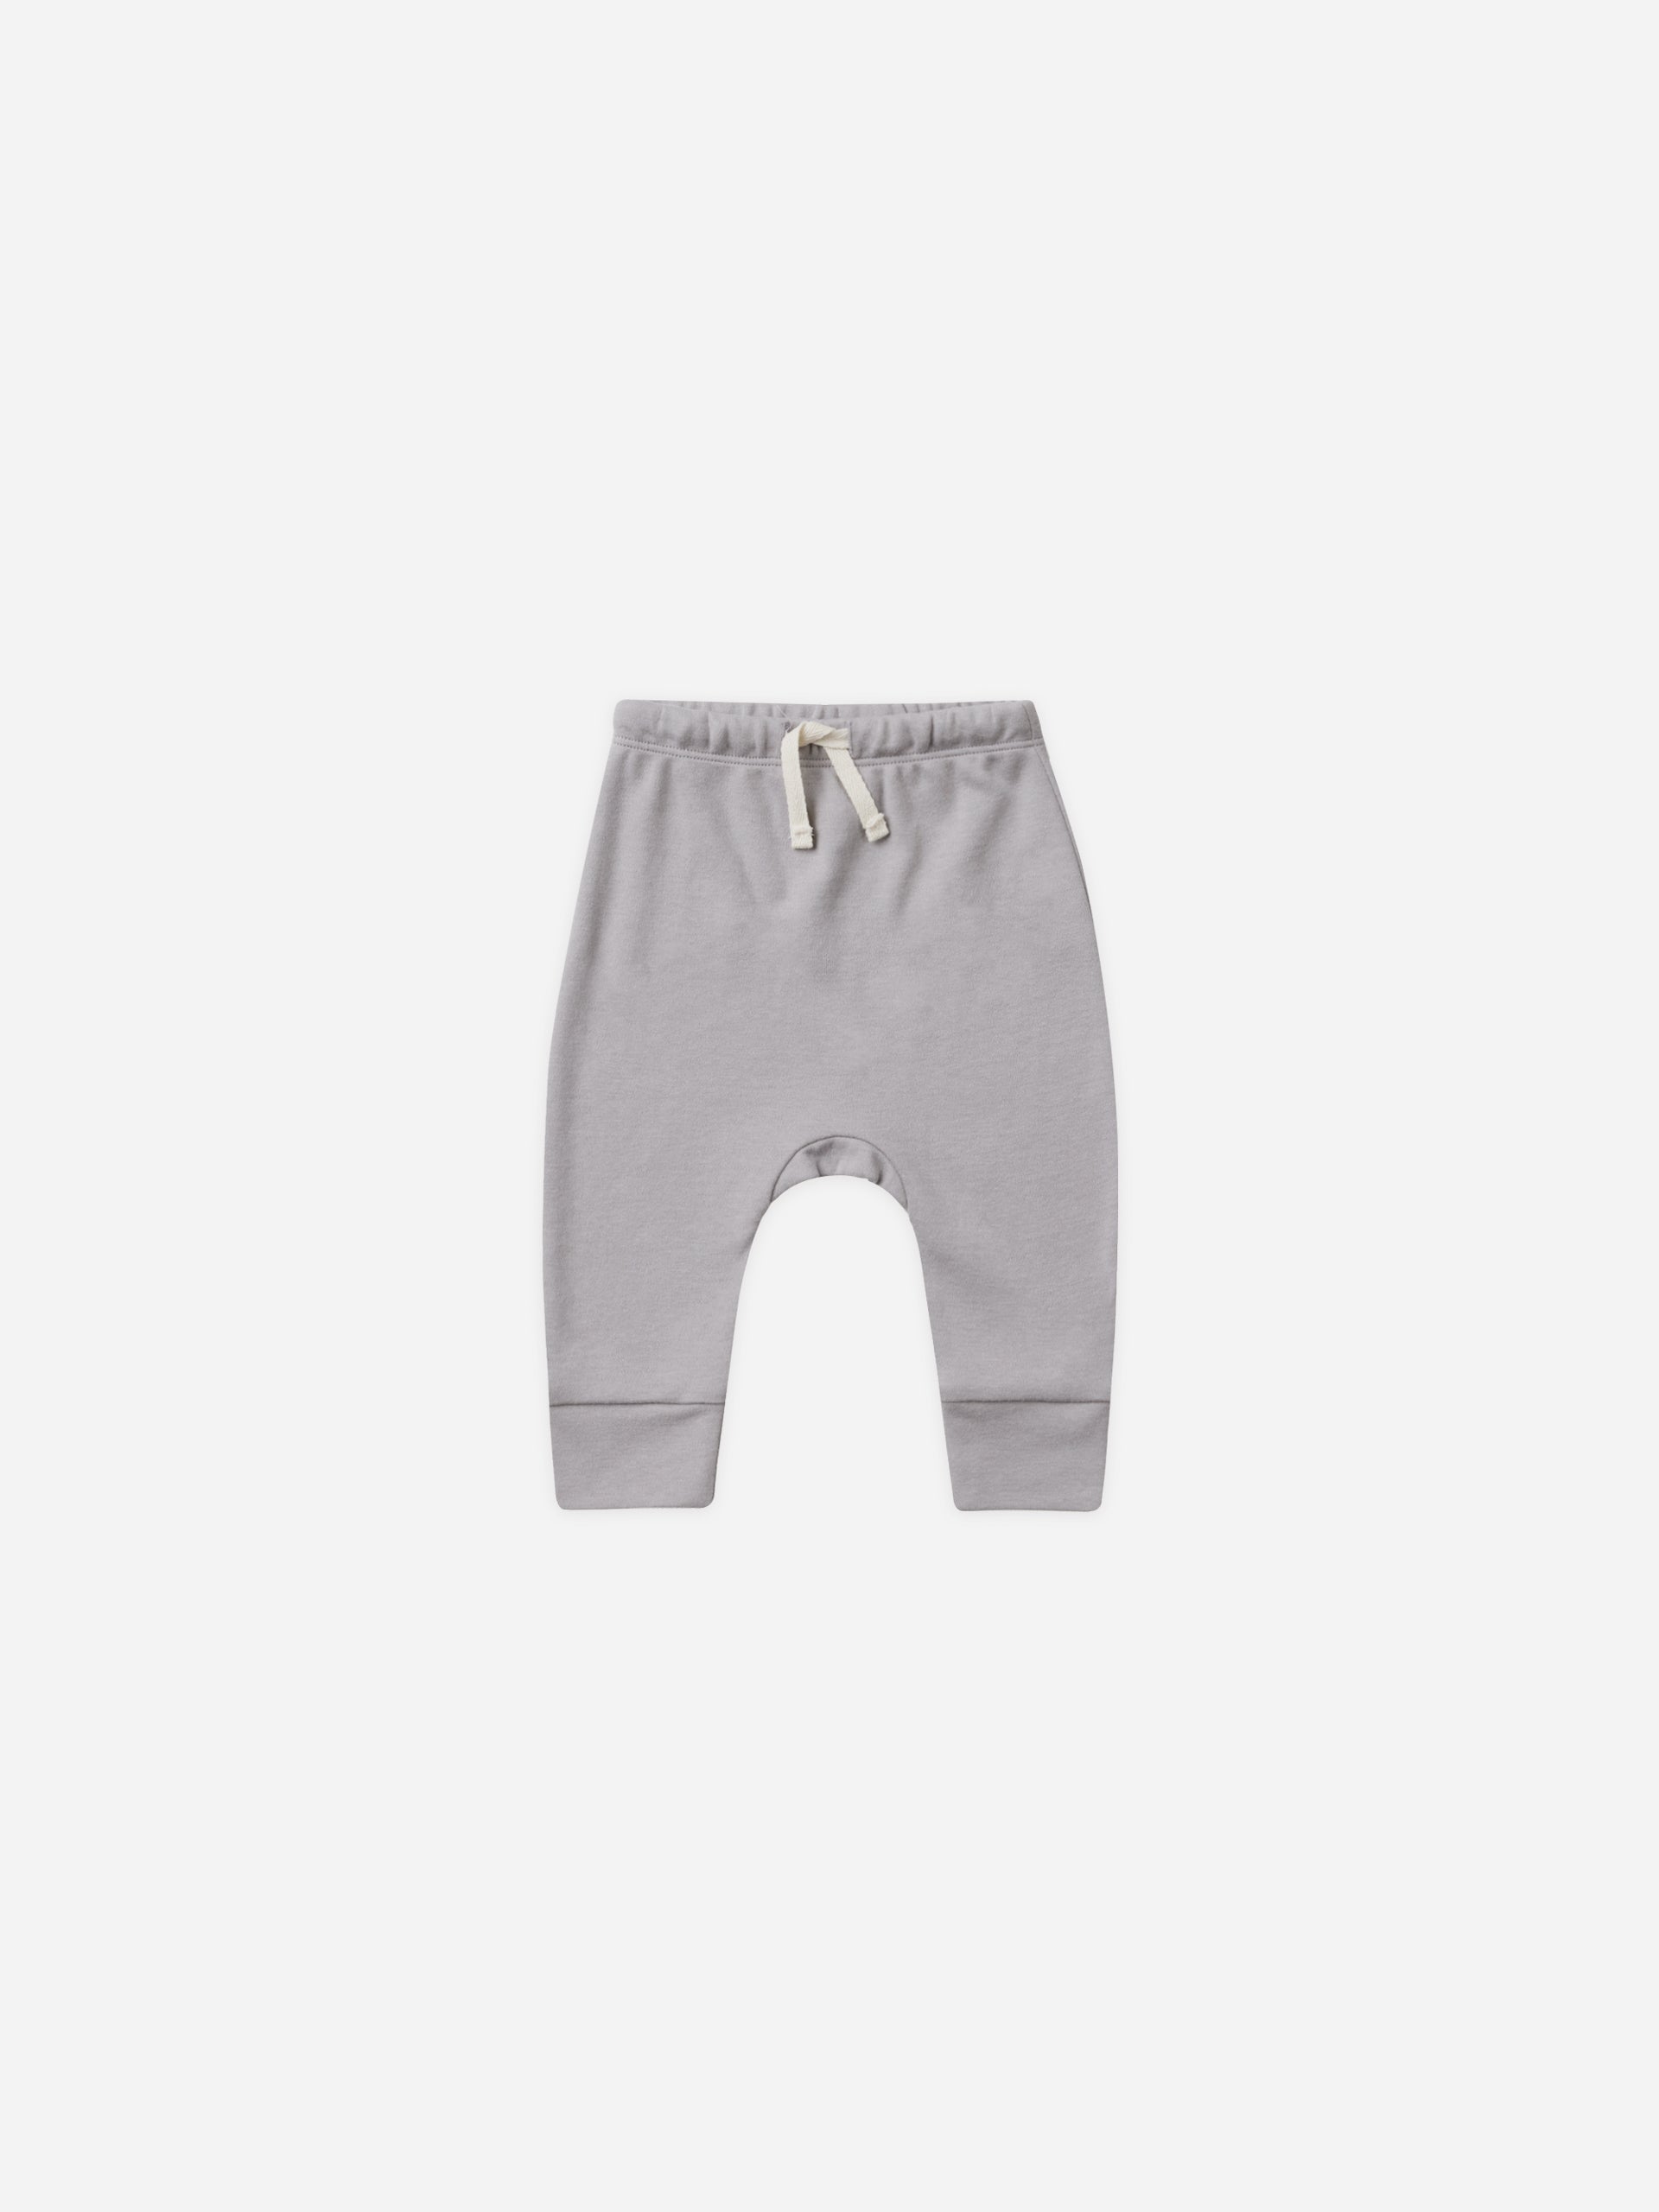 Drawstring Pant || Periwinkle - Rylee + Cru | Kids Clothes | Trendy Baby Clothes | Modern Infant Outfits |